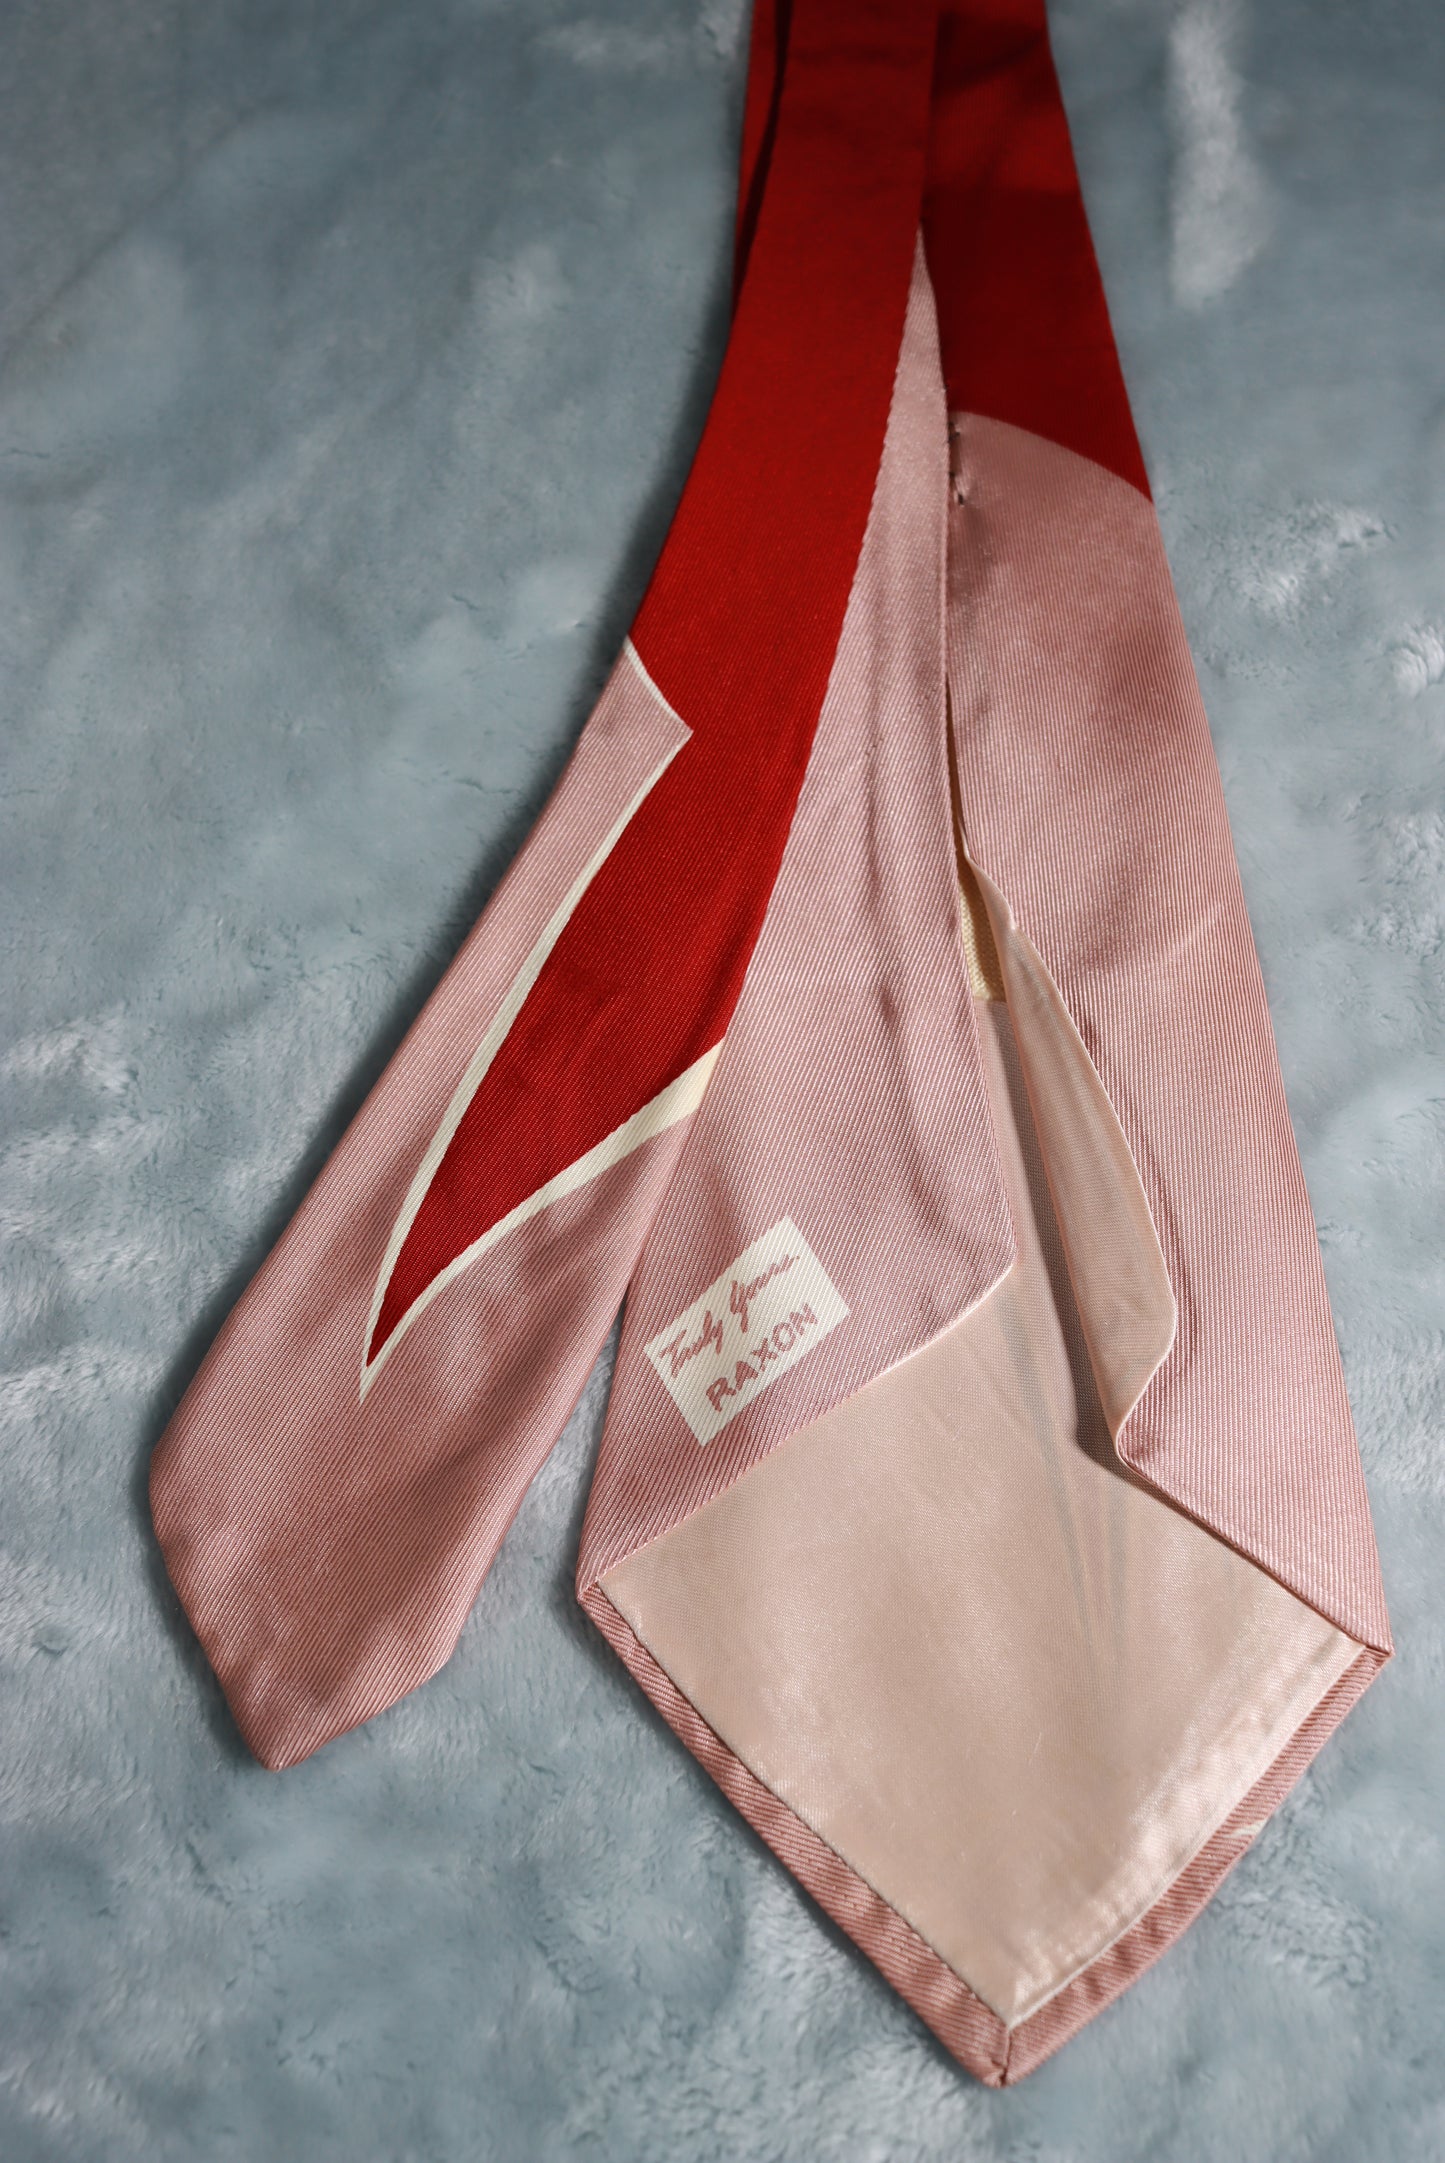 Vintage Truly Yours Raxon Signature Swing Tie 1940s/50s